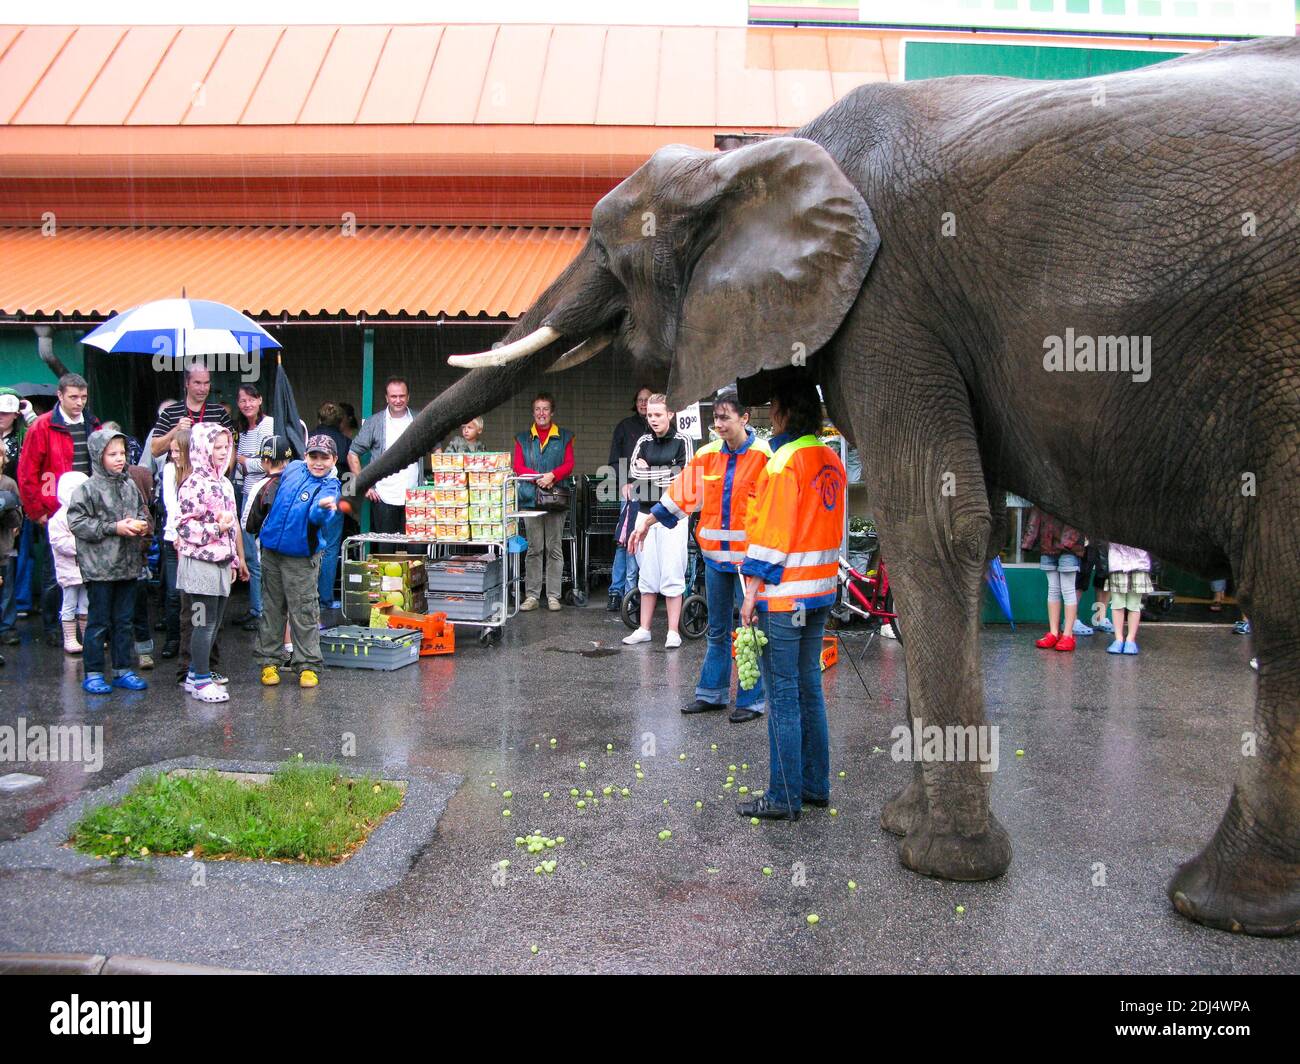 Families gather around the circus elephant outside the grocery storefor the show Stock Photo